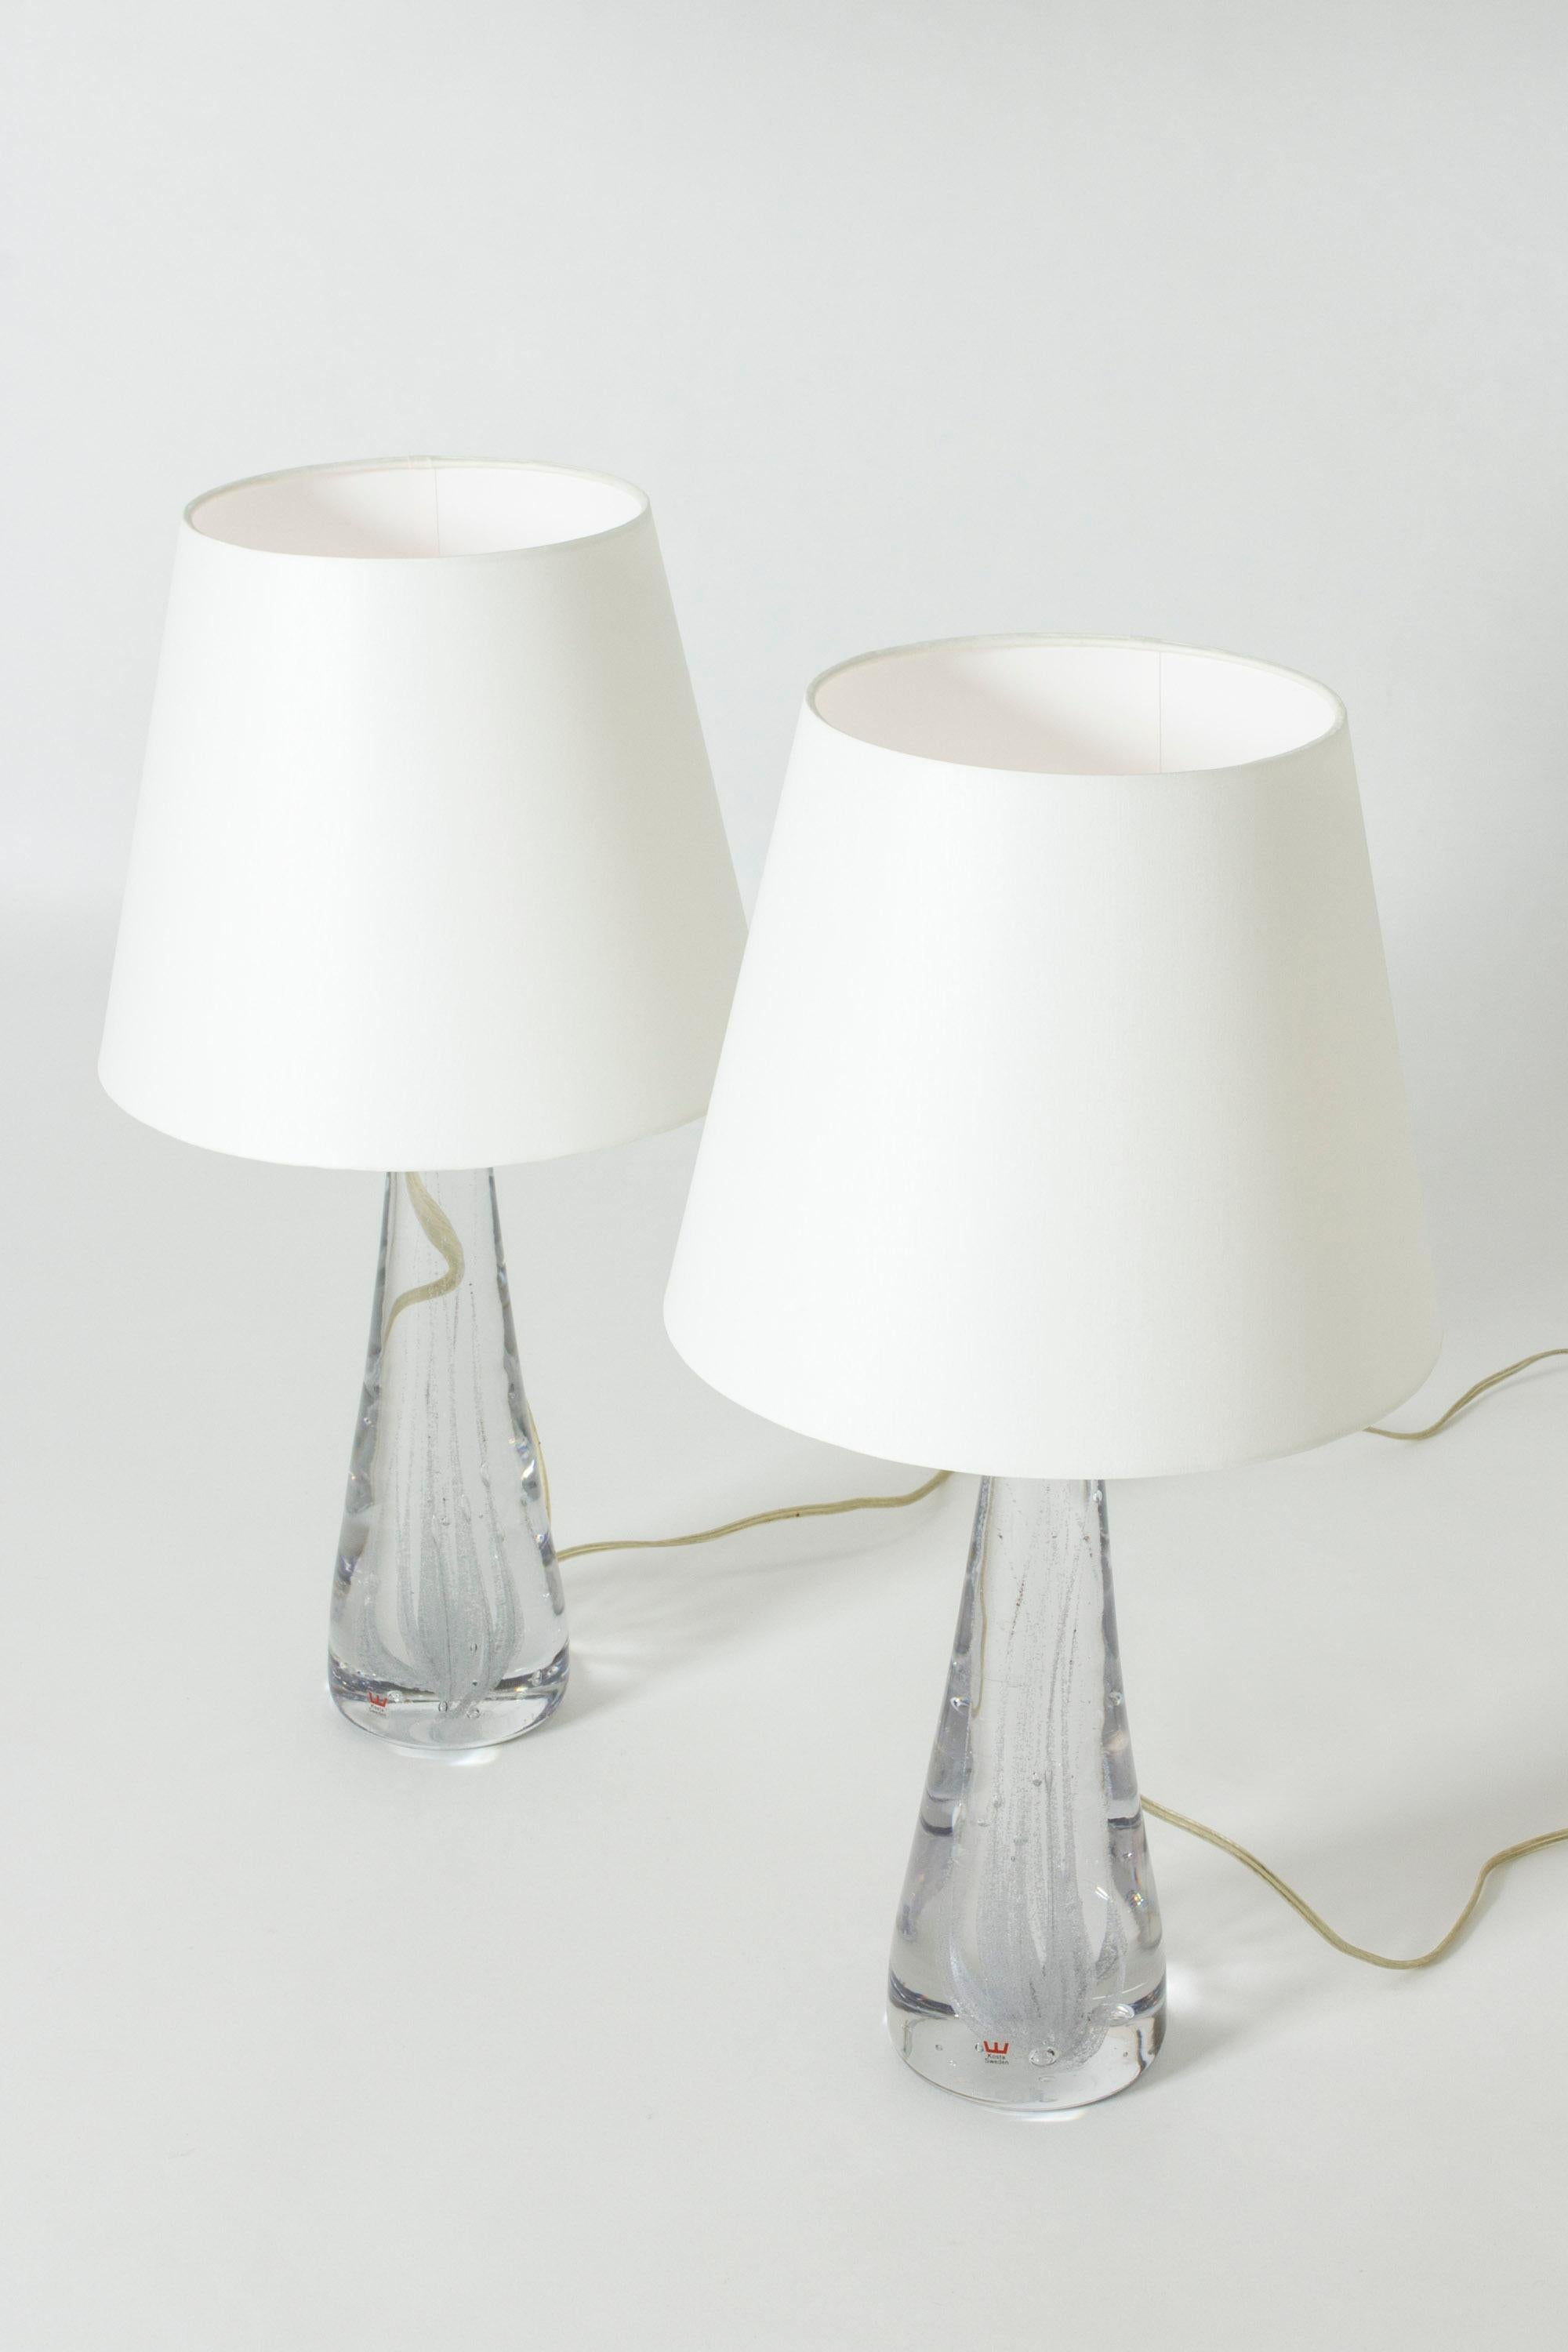 Scandinavian Modern Pair of Crystal Glass Table Lamps by Vicke Lindstrand for Kosta, Sweden, 1950s